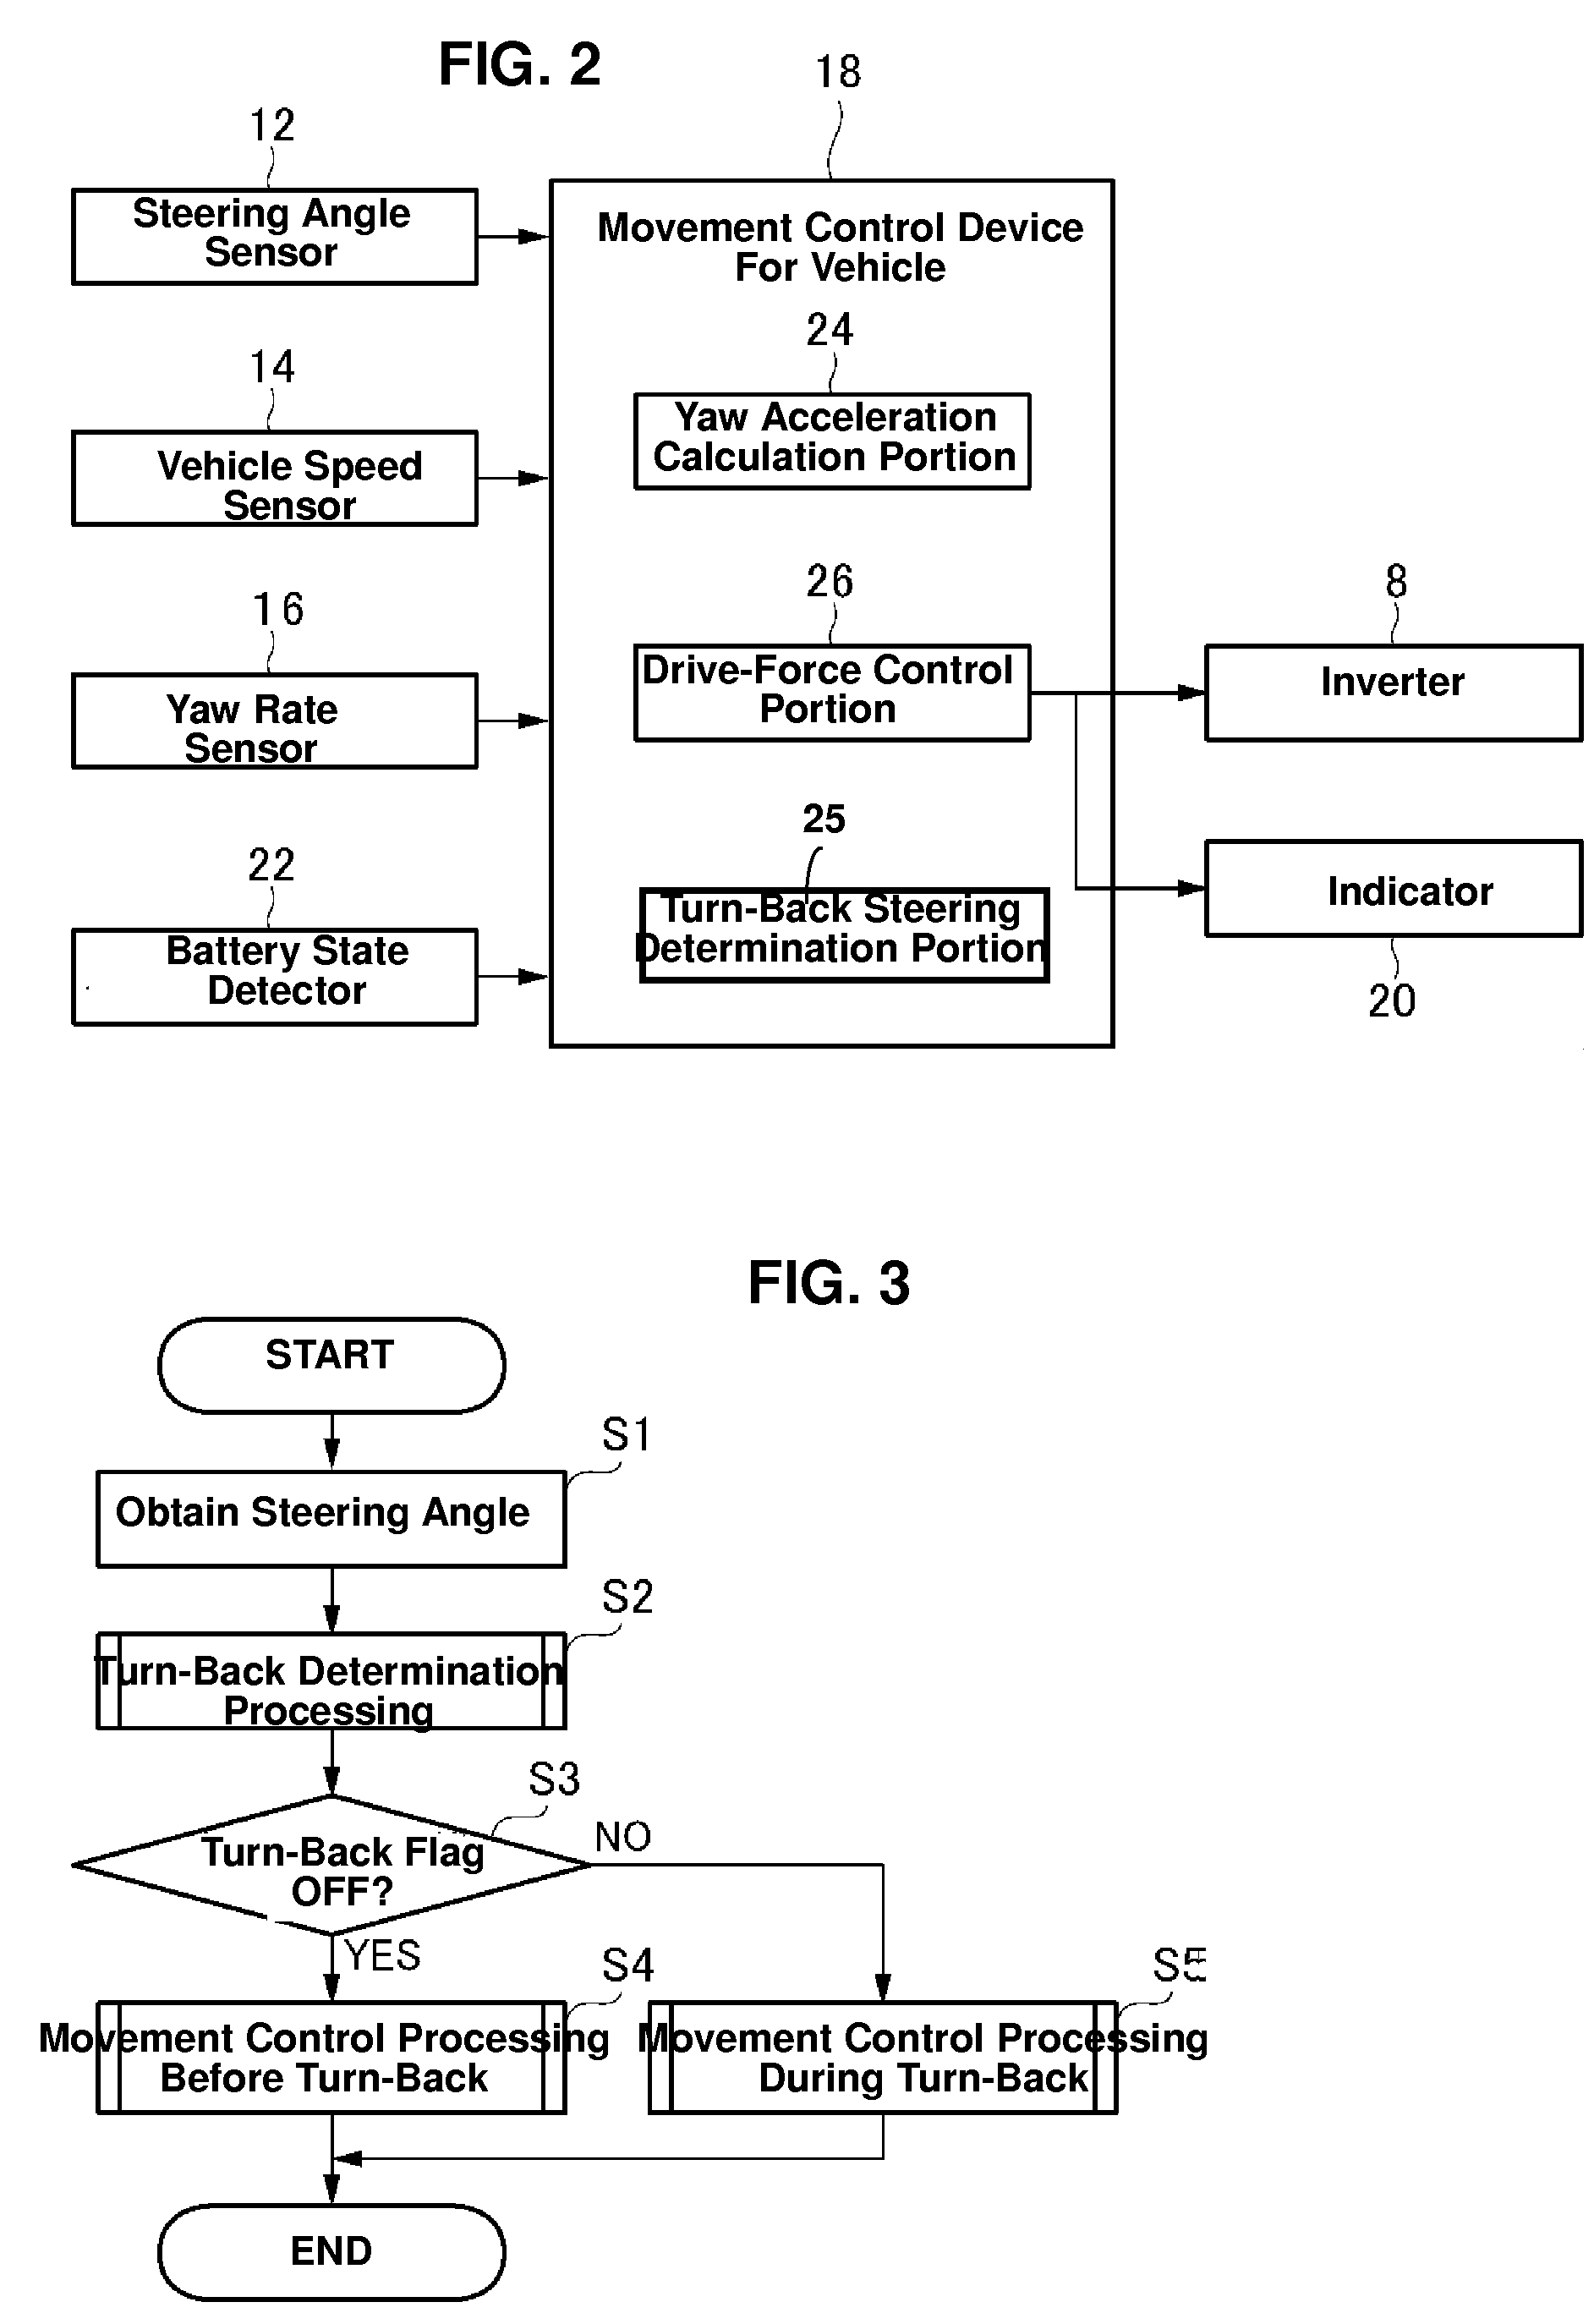 Movement control device for vehicle